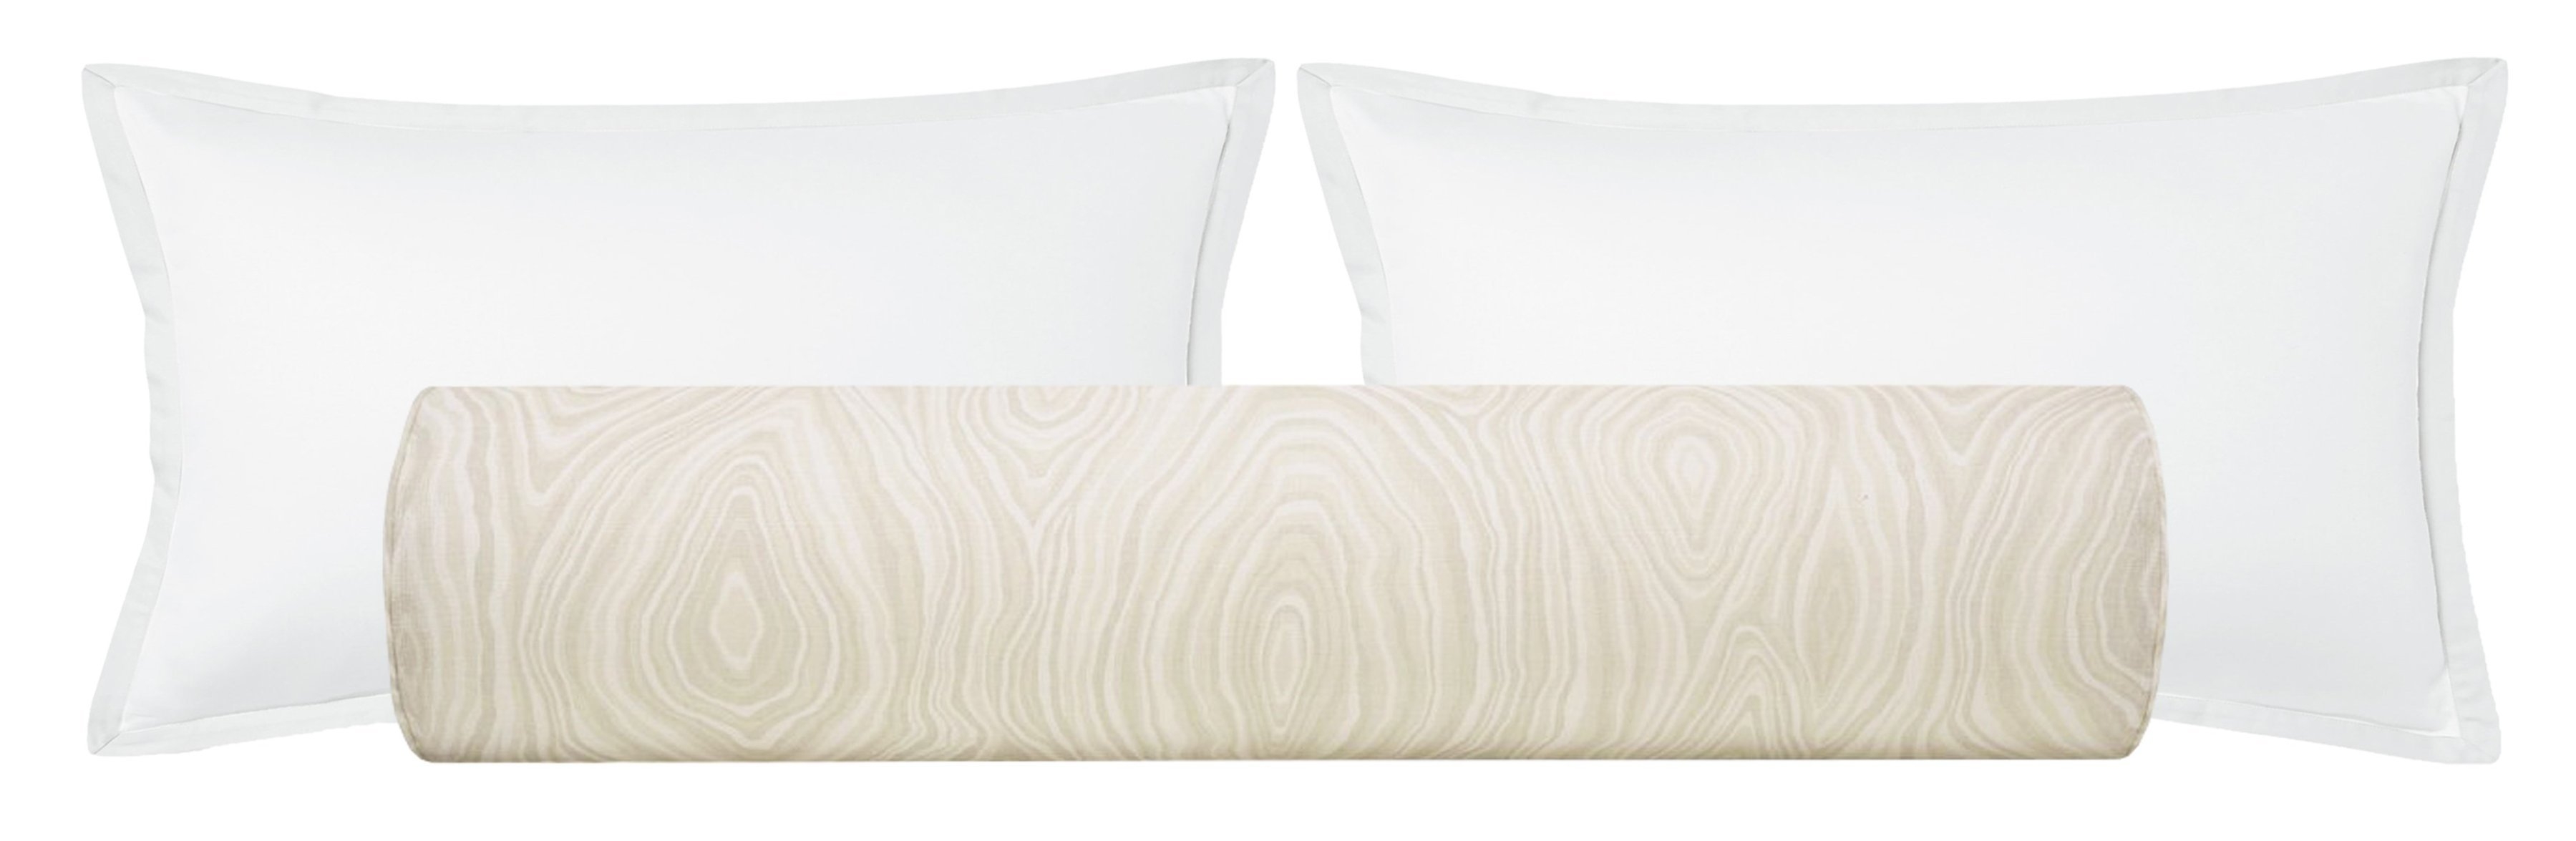 THE BOLSTER :: AGATE LINEN PRINT // NATURAL - TWIN // 9" X 24" - Image 0